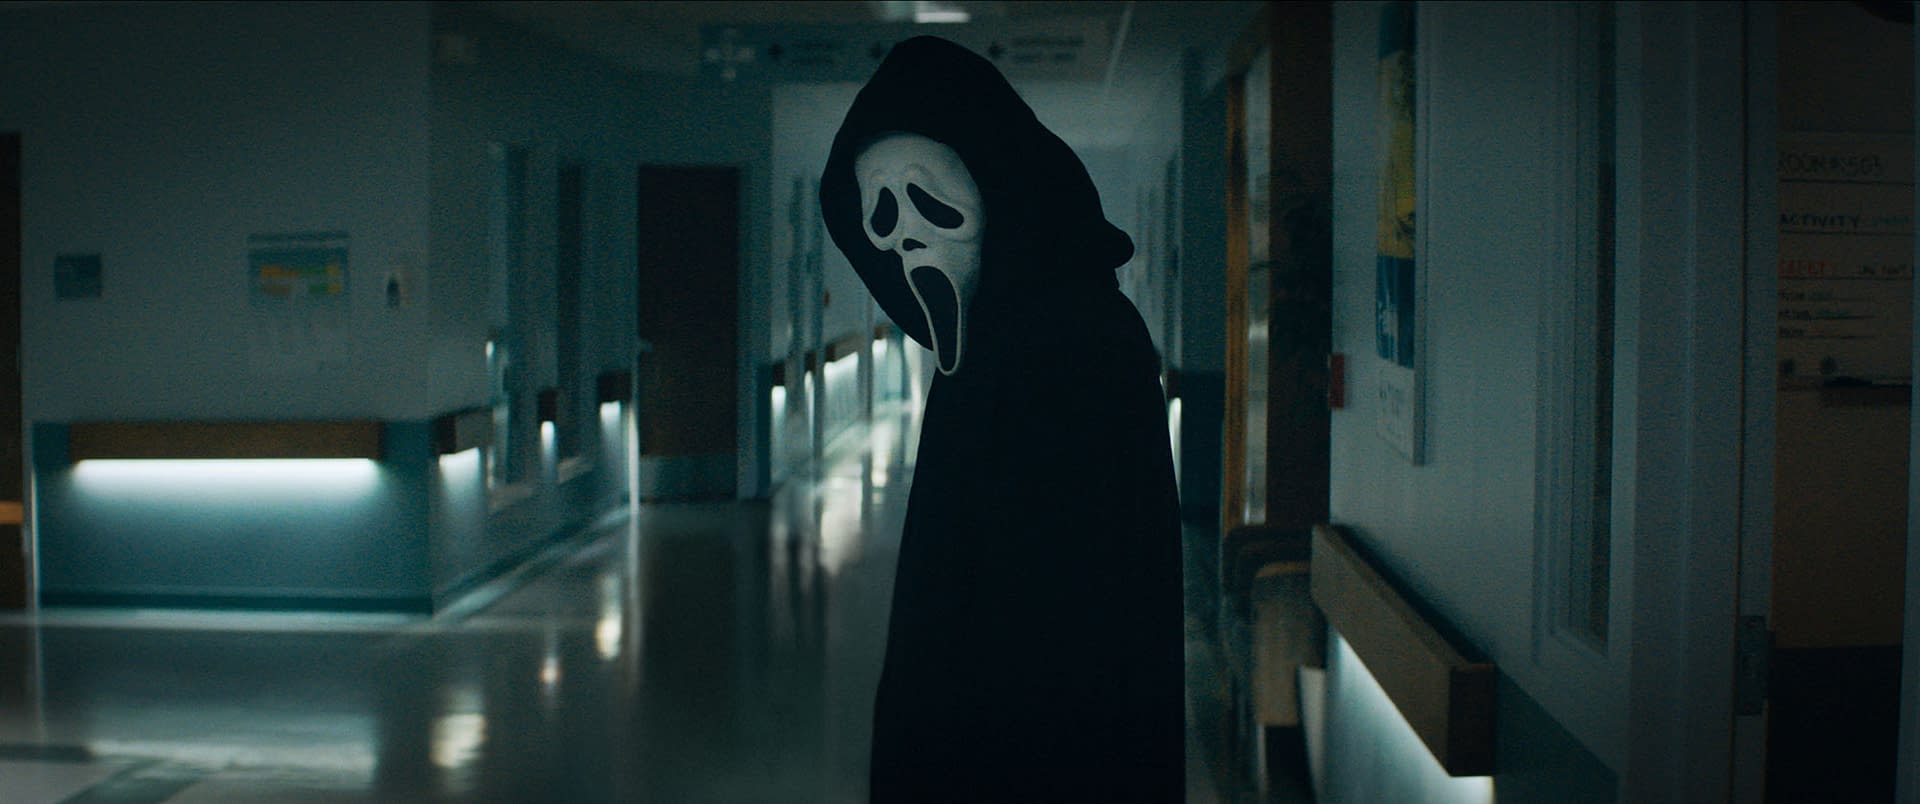 Scream 6 First Reactions: Fans Say It's the Bloodiest Yet